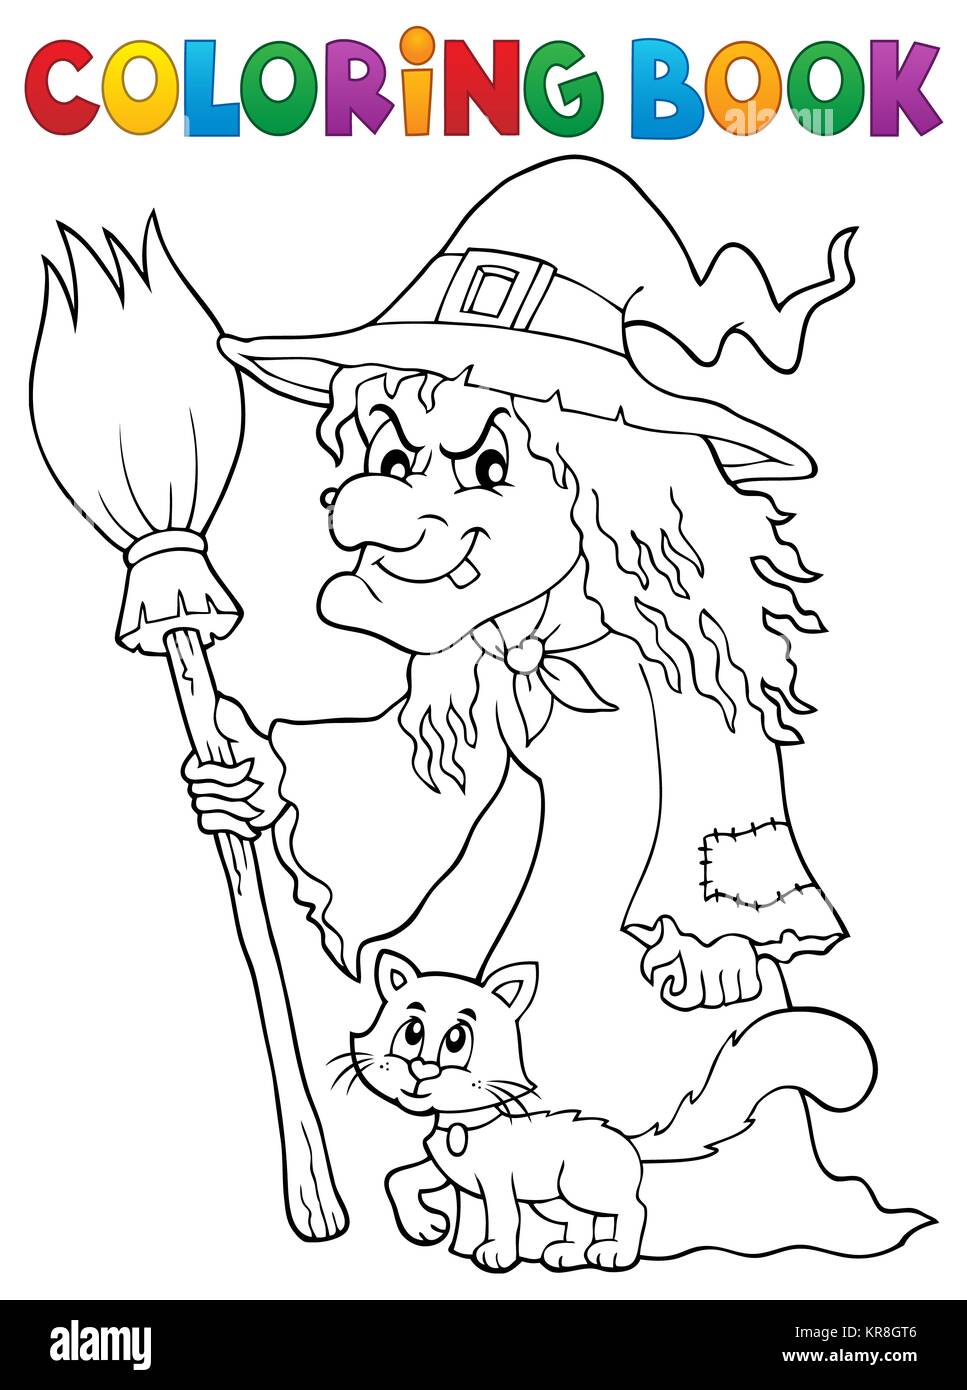 Coloring book witch with cat and broom stock photo